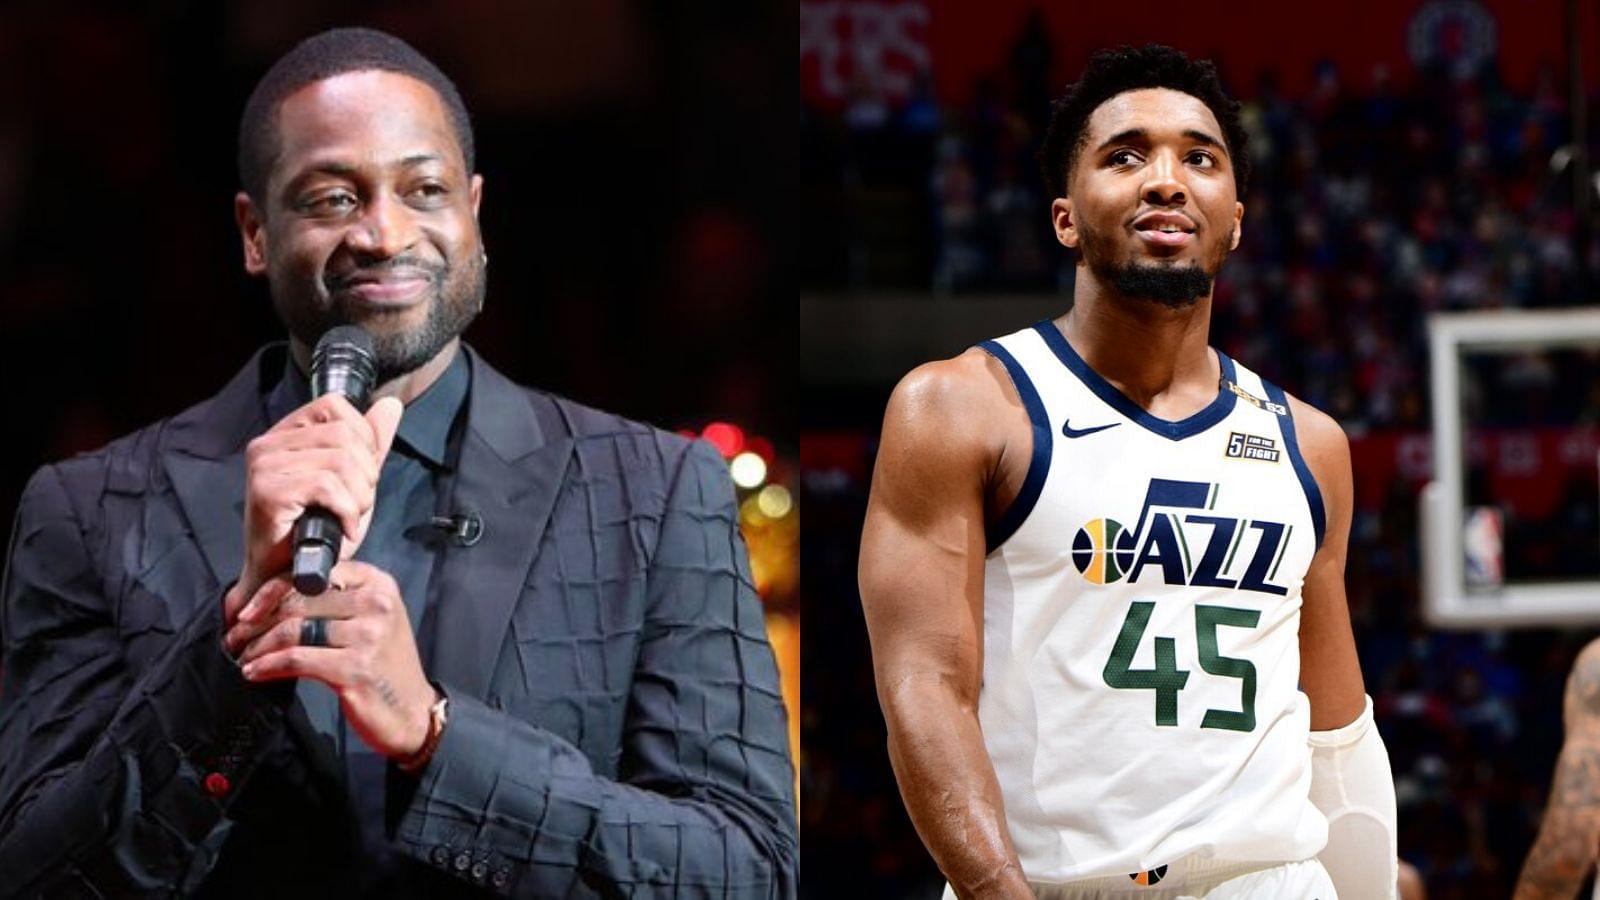 “Dwyane Wade wants Donovan Mitchell in Miami”: A fan interaction clip of the Jazz minority owner caught his wish to see the $135 million star in his former club